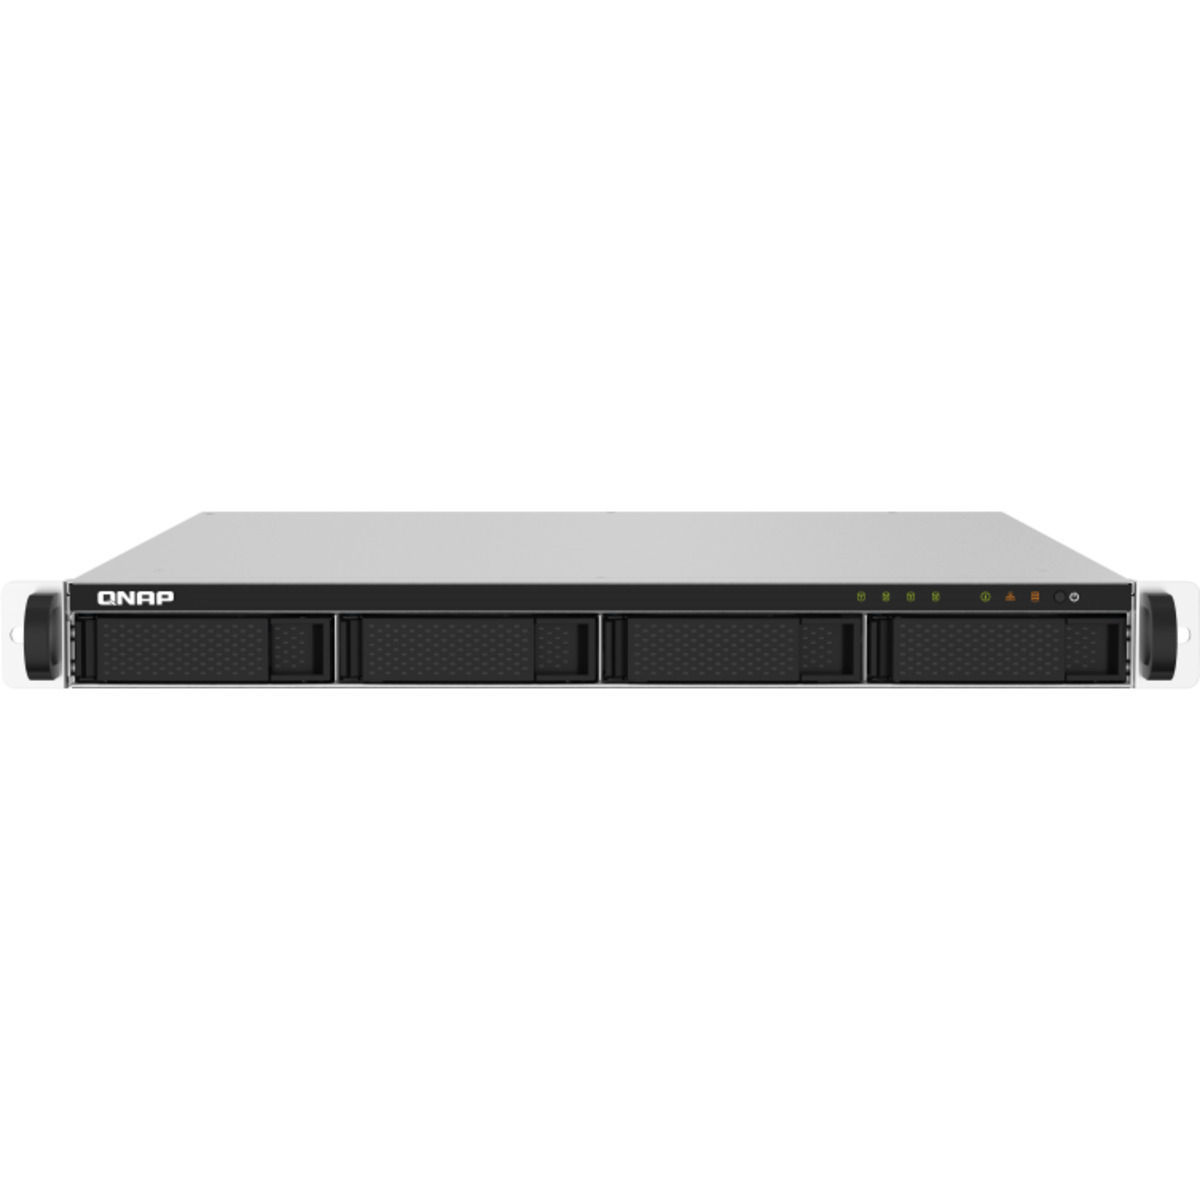 buy $2262 QNAP TS-432PXU-RP 8tb RackMount NAS - Network Attached Storage Device 4x2000gb Western Digital Red SA500 WDS200T1R0A 2.5 SATA 6Gb/s SSD NAS Class Drives Installed - Burn-In Tested - FREE RAM UPGRADE - nas headquarters buy network attached storage server device das new raid-5 free shipping usa TS-432PXU-RP